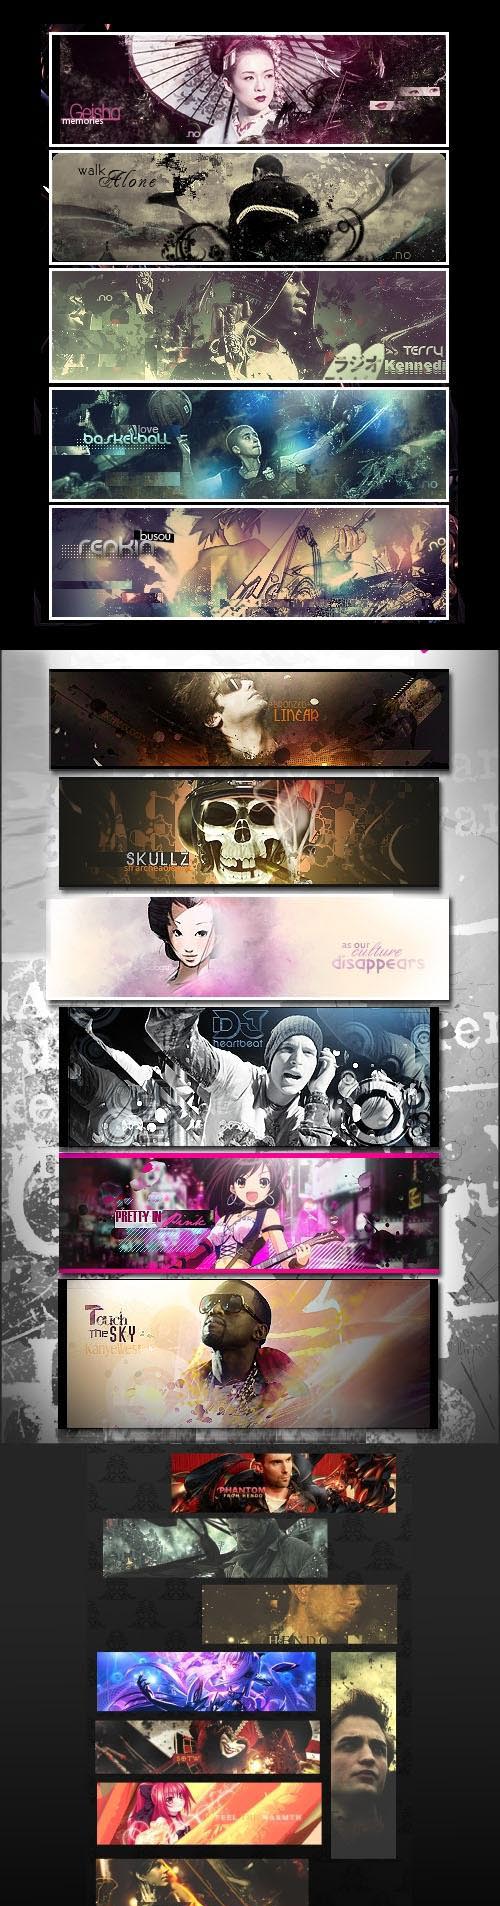 32 Awesome PSD Effects Collection